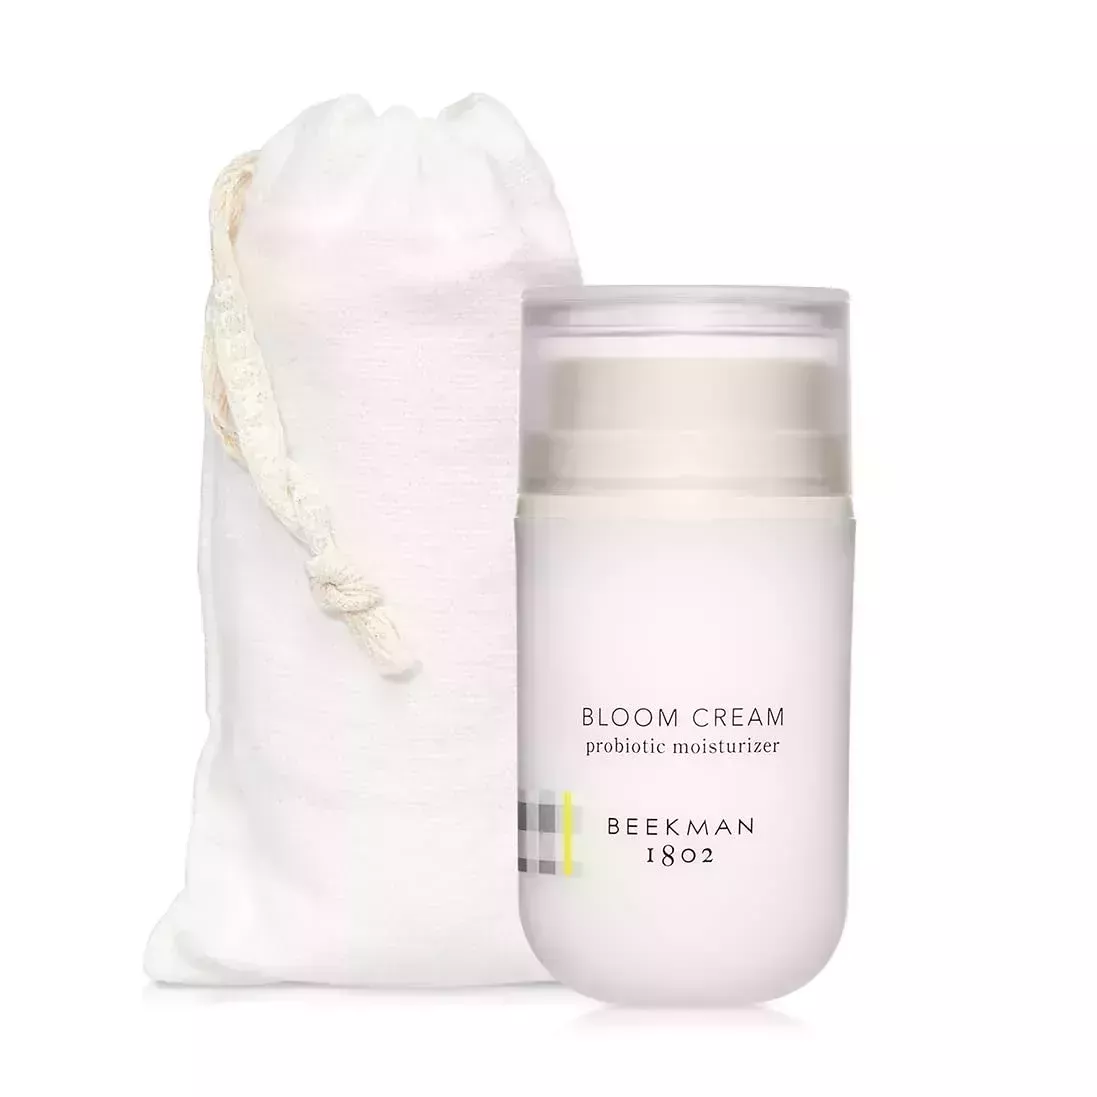 A white bag and jar of Beekman 1802 Bloom Cream Daily Moisturizer